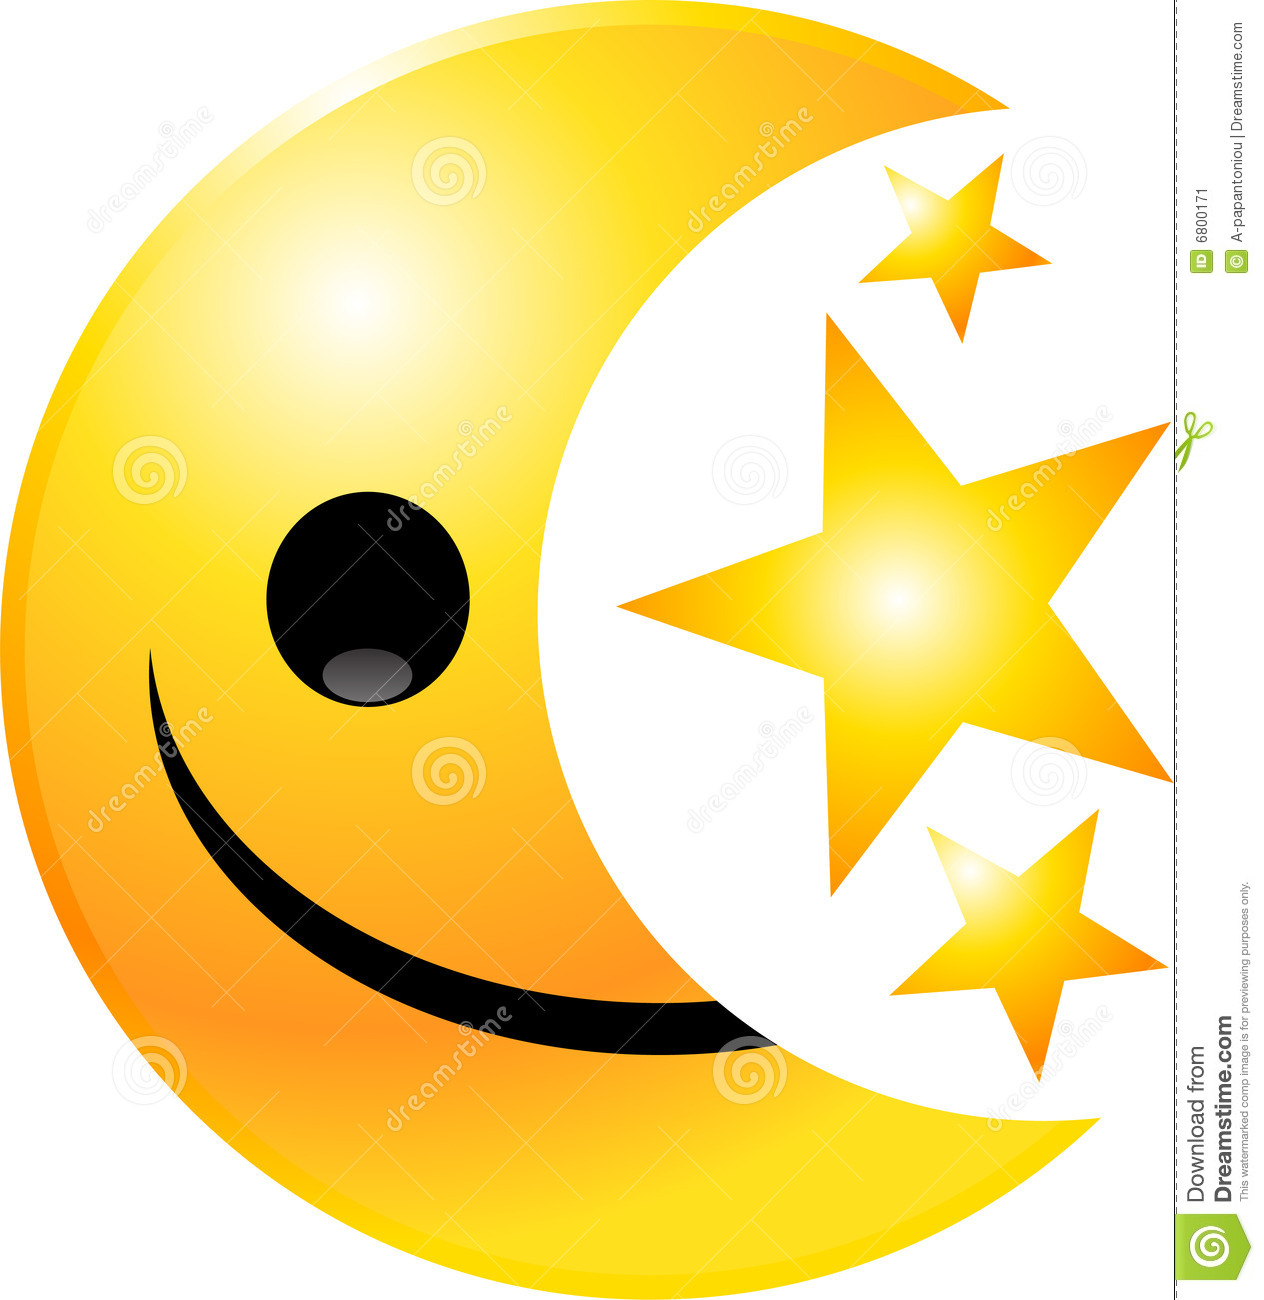 Smiley Face Thumbs Up Black And White Smiley Face Clipart Emoticon